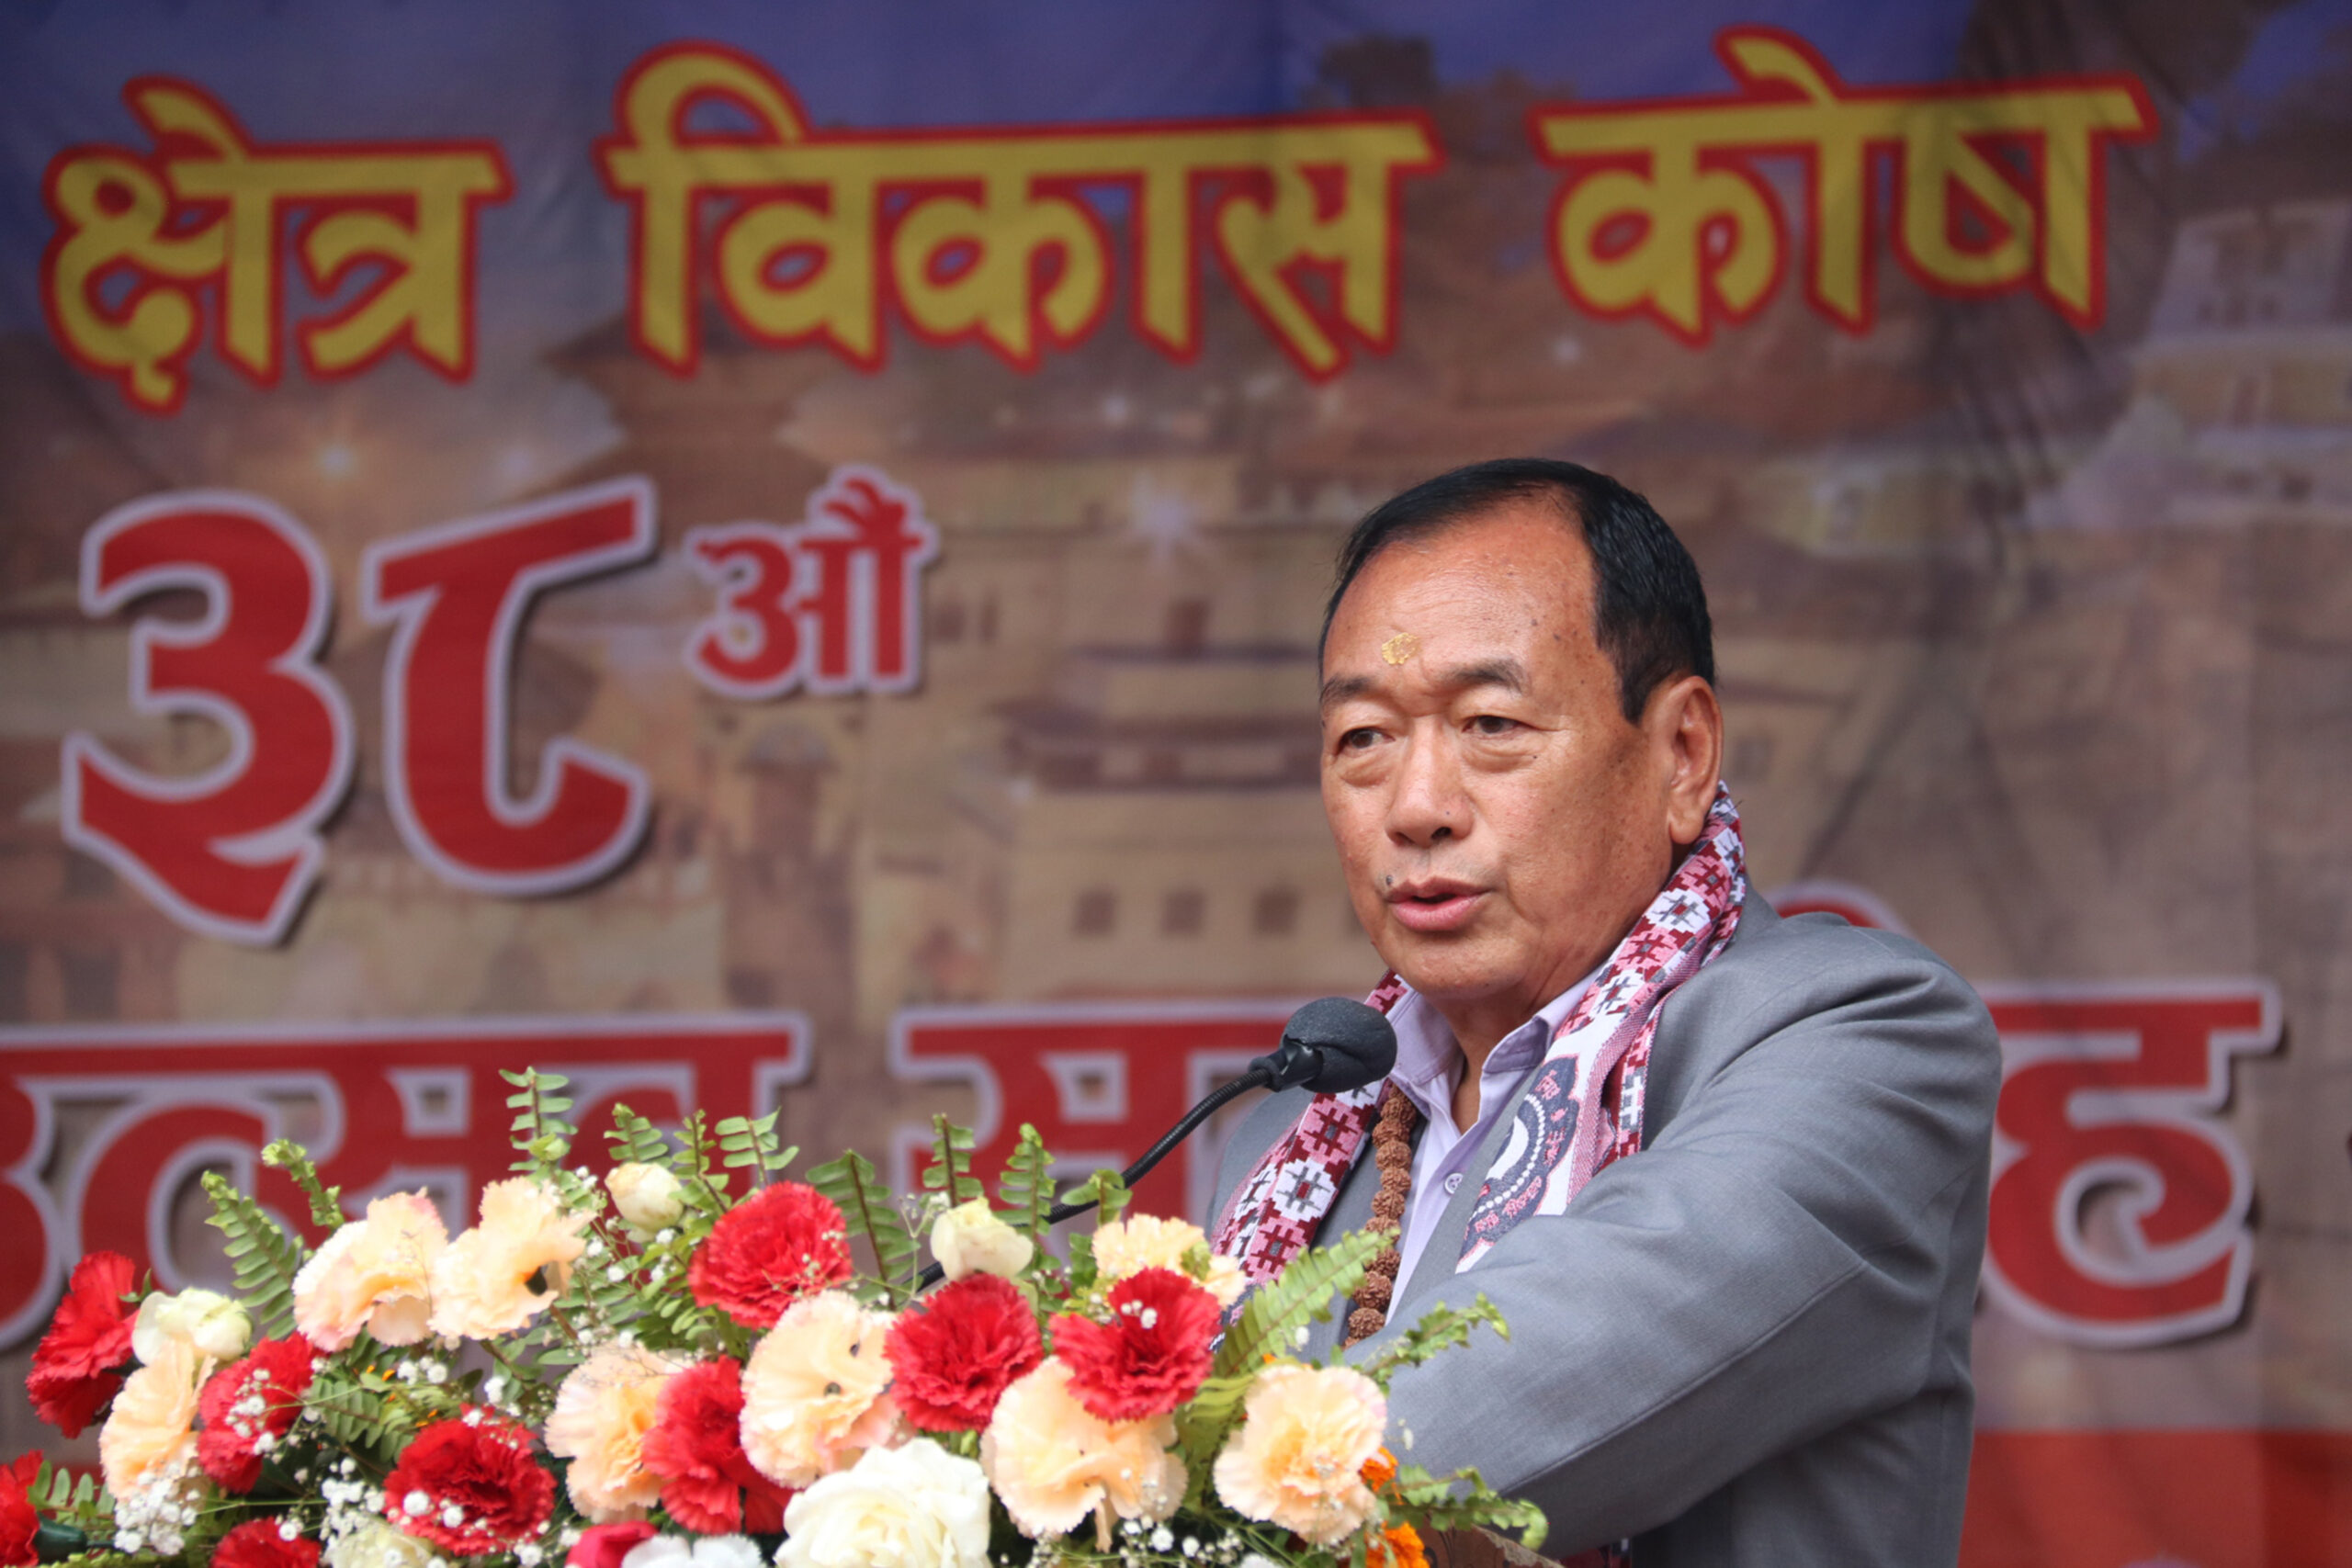 Pashupati area should remain free from political influence, emphasizes Minister Tamang